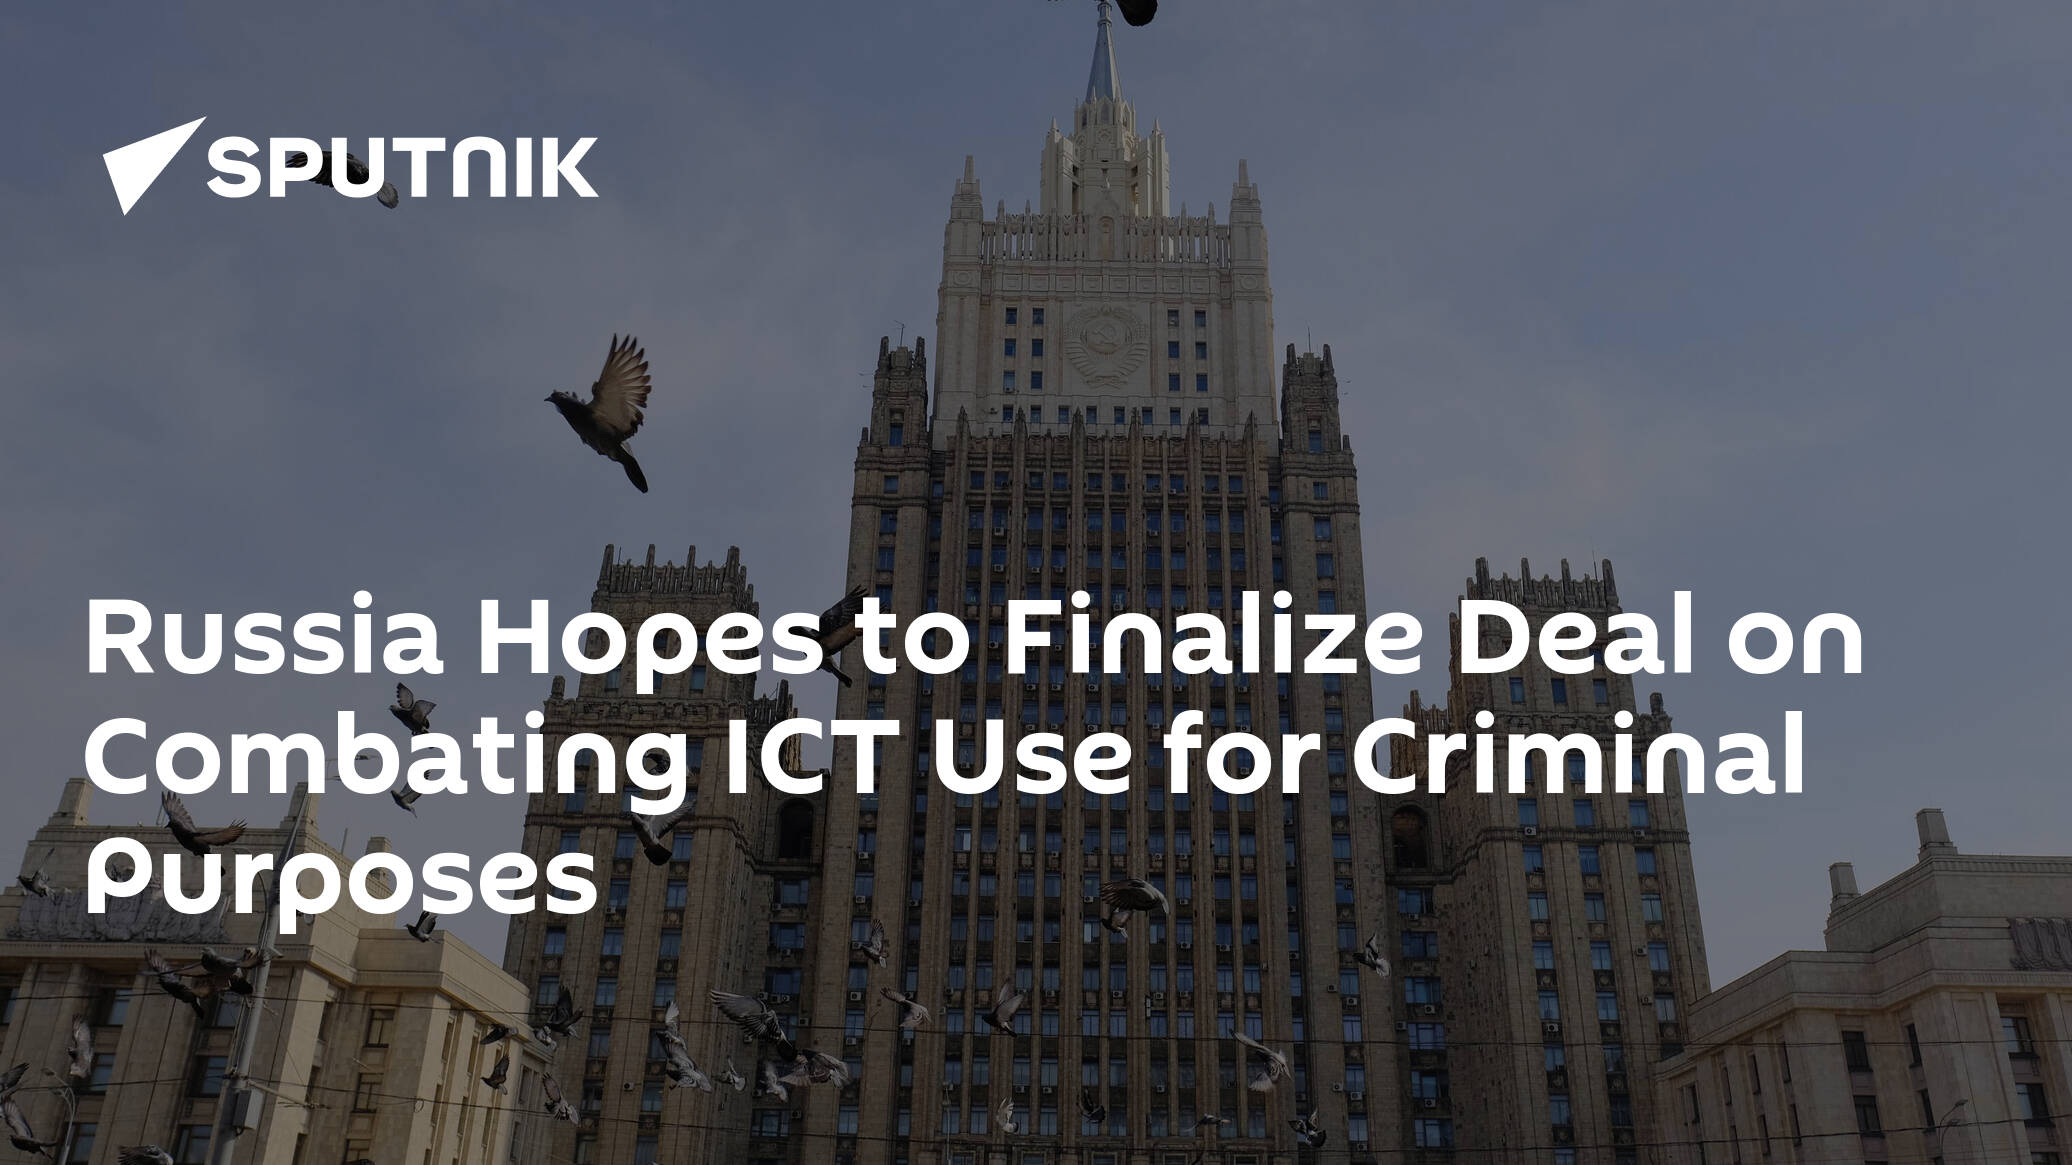 Russia Hopes to Finalize Deal on Combating ICT Use for Criminal Purposes